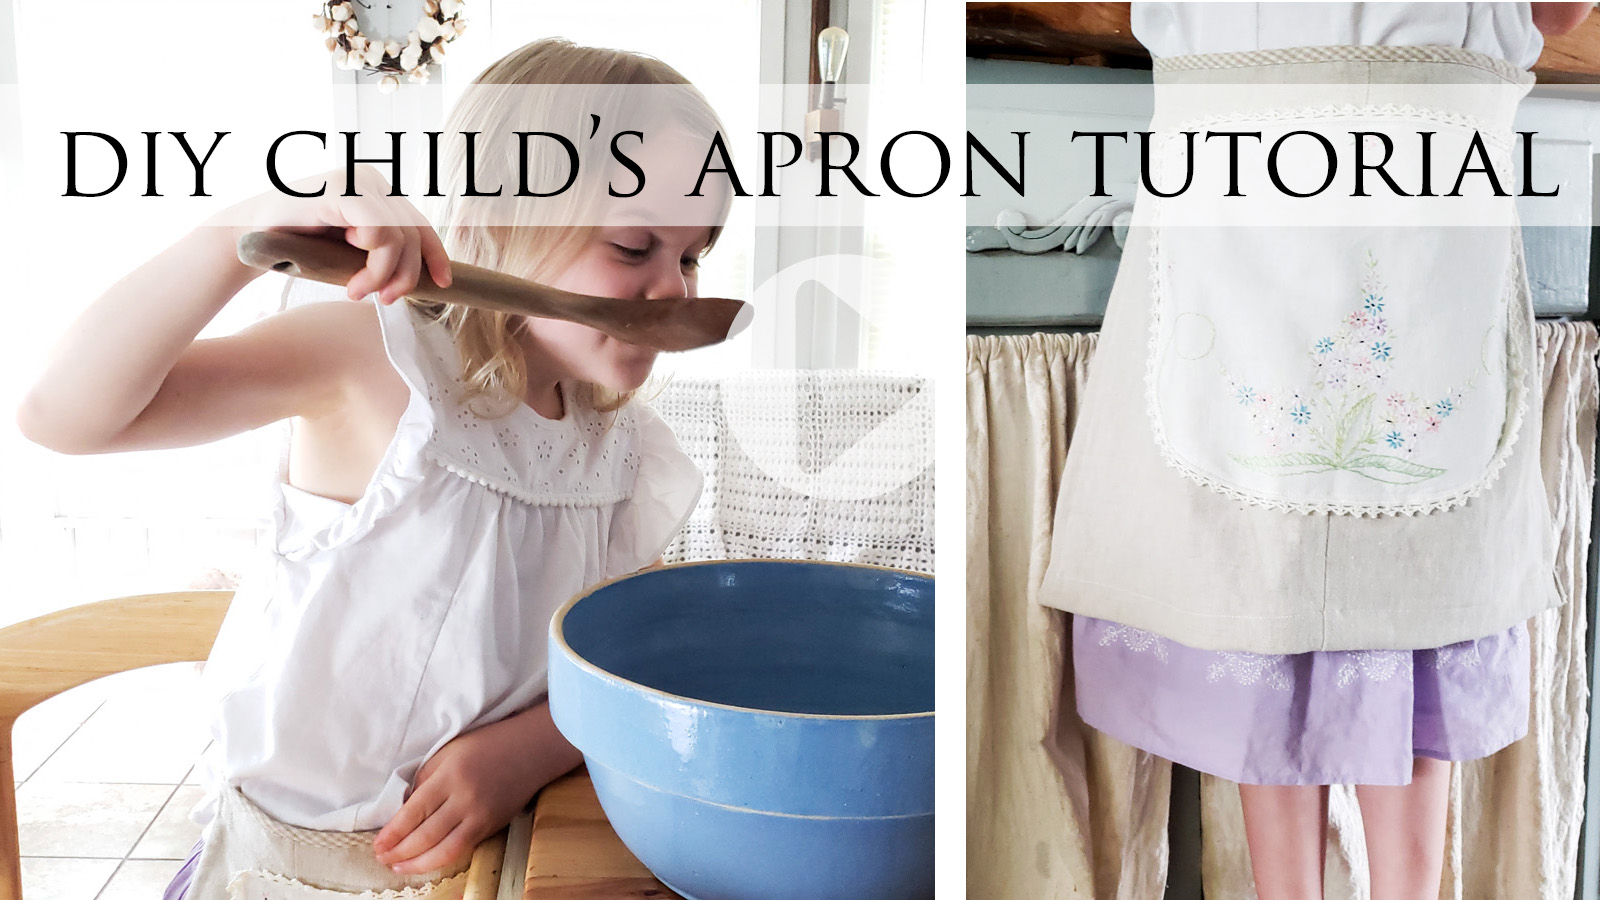 DIY Video Tutorial for Child's Apron from Refashioned from a Linen Skirt by Larissa of Prodigal Pieces | prodigalpieces.com